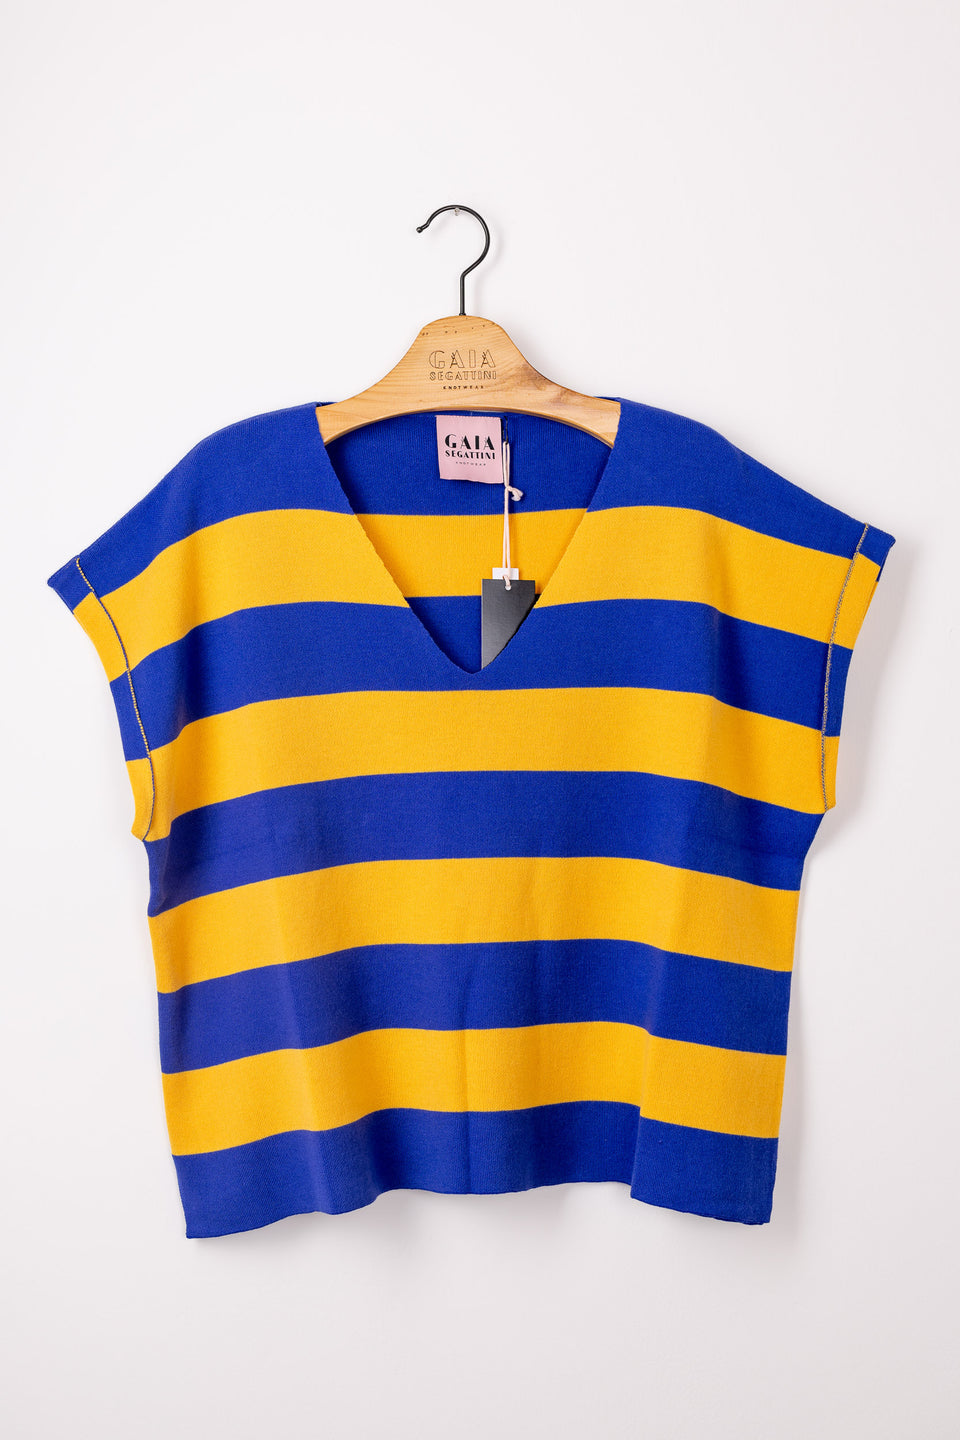 peace knit tshirt - striped cornflower and sunflower 